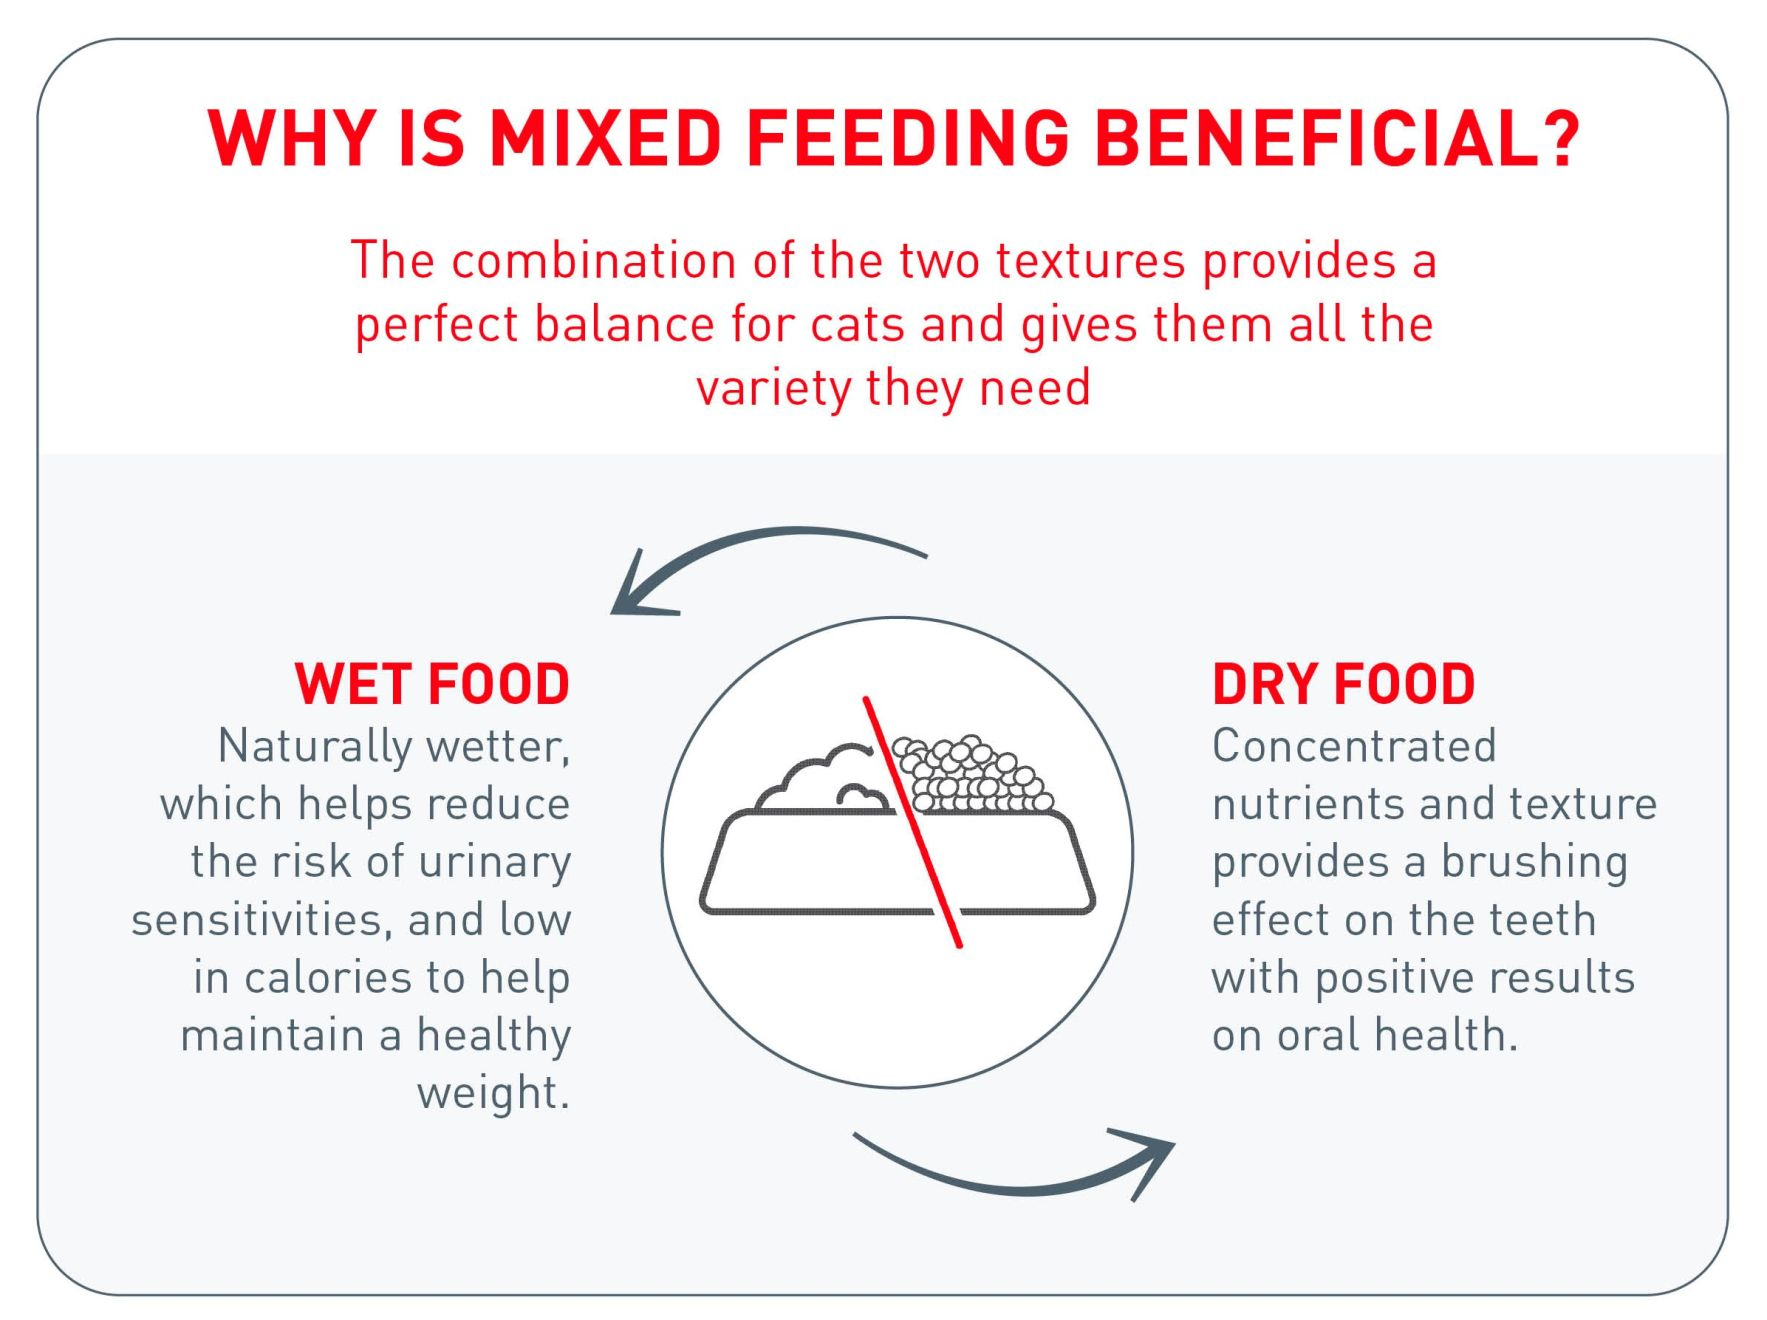 Key benefits of mix-feeding for cats